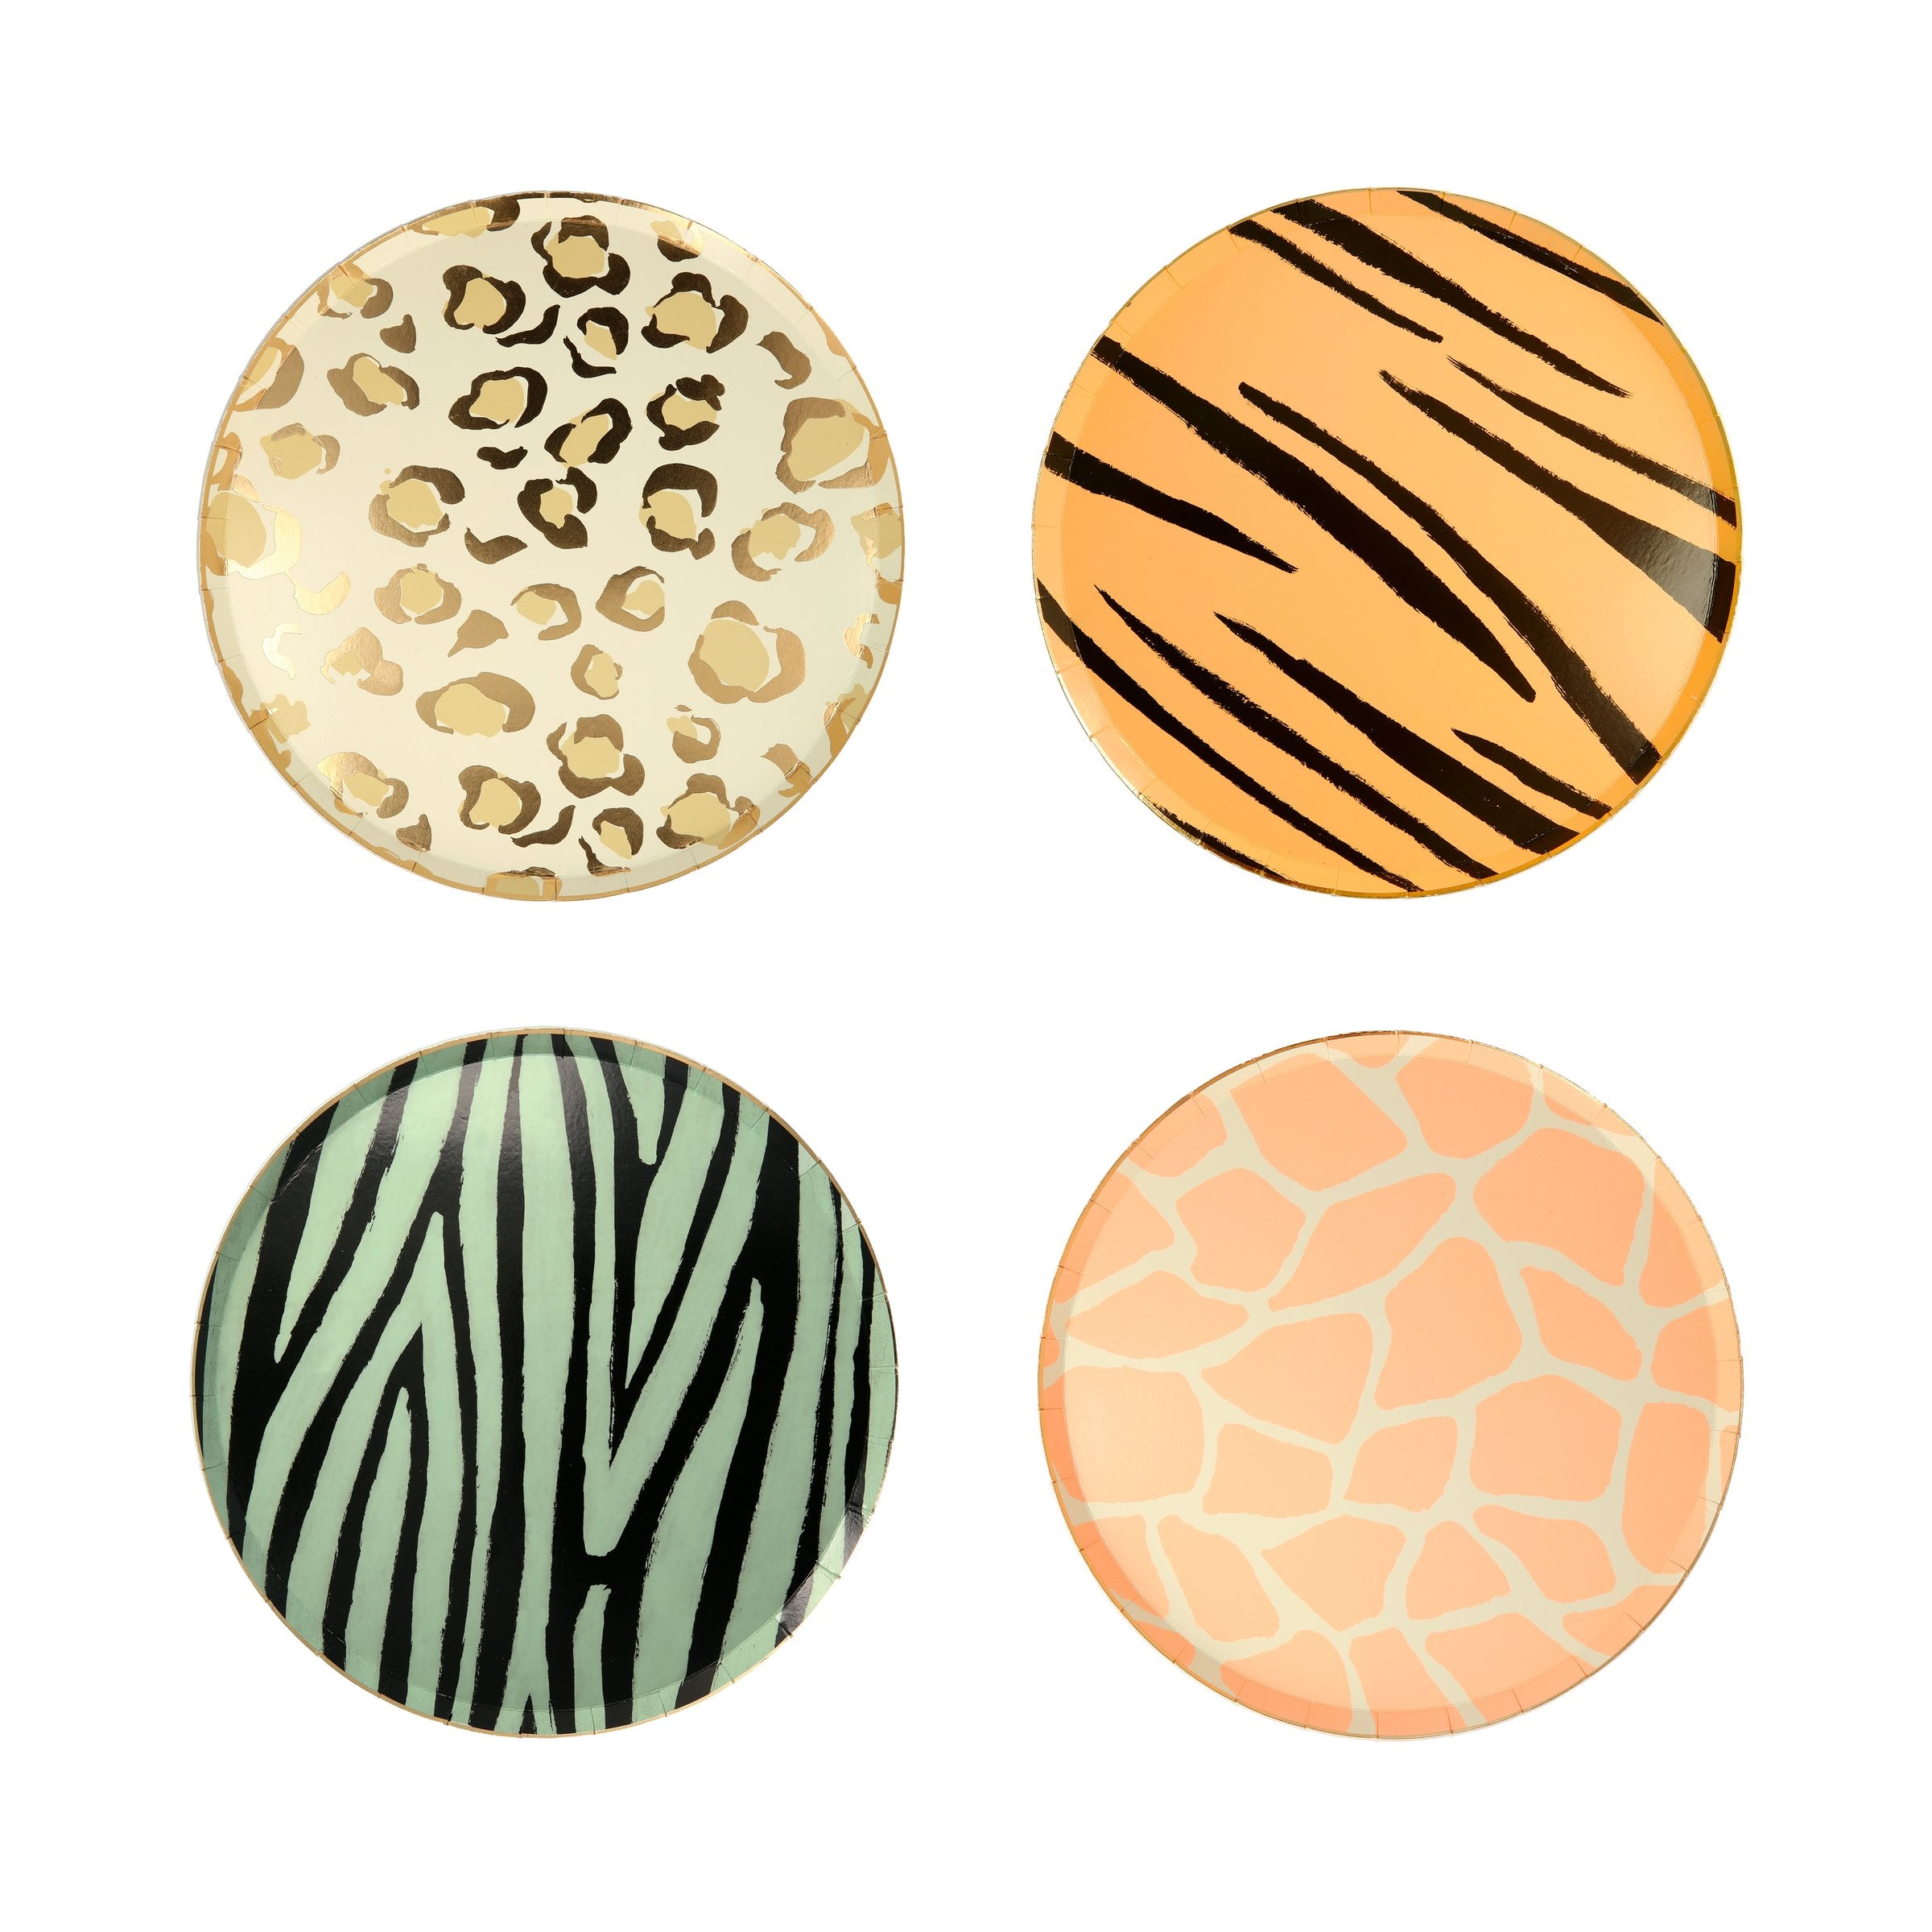 Our animal print side plates are fabulous paper plates for a safari party.